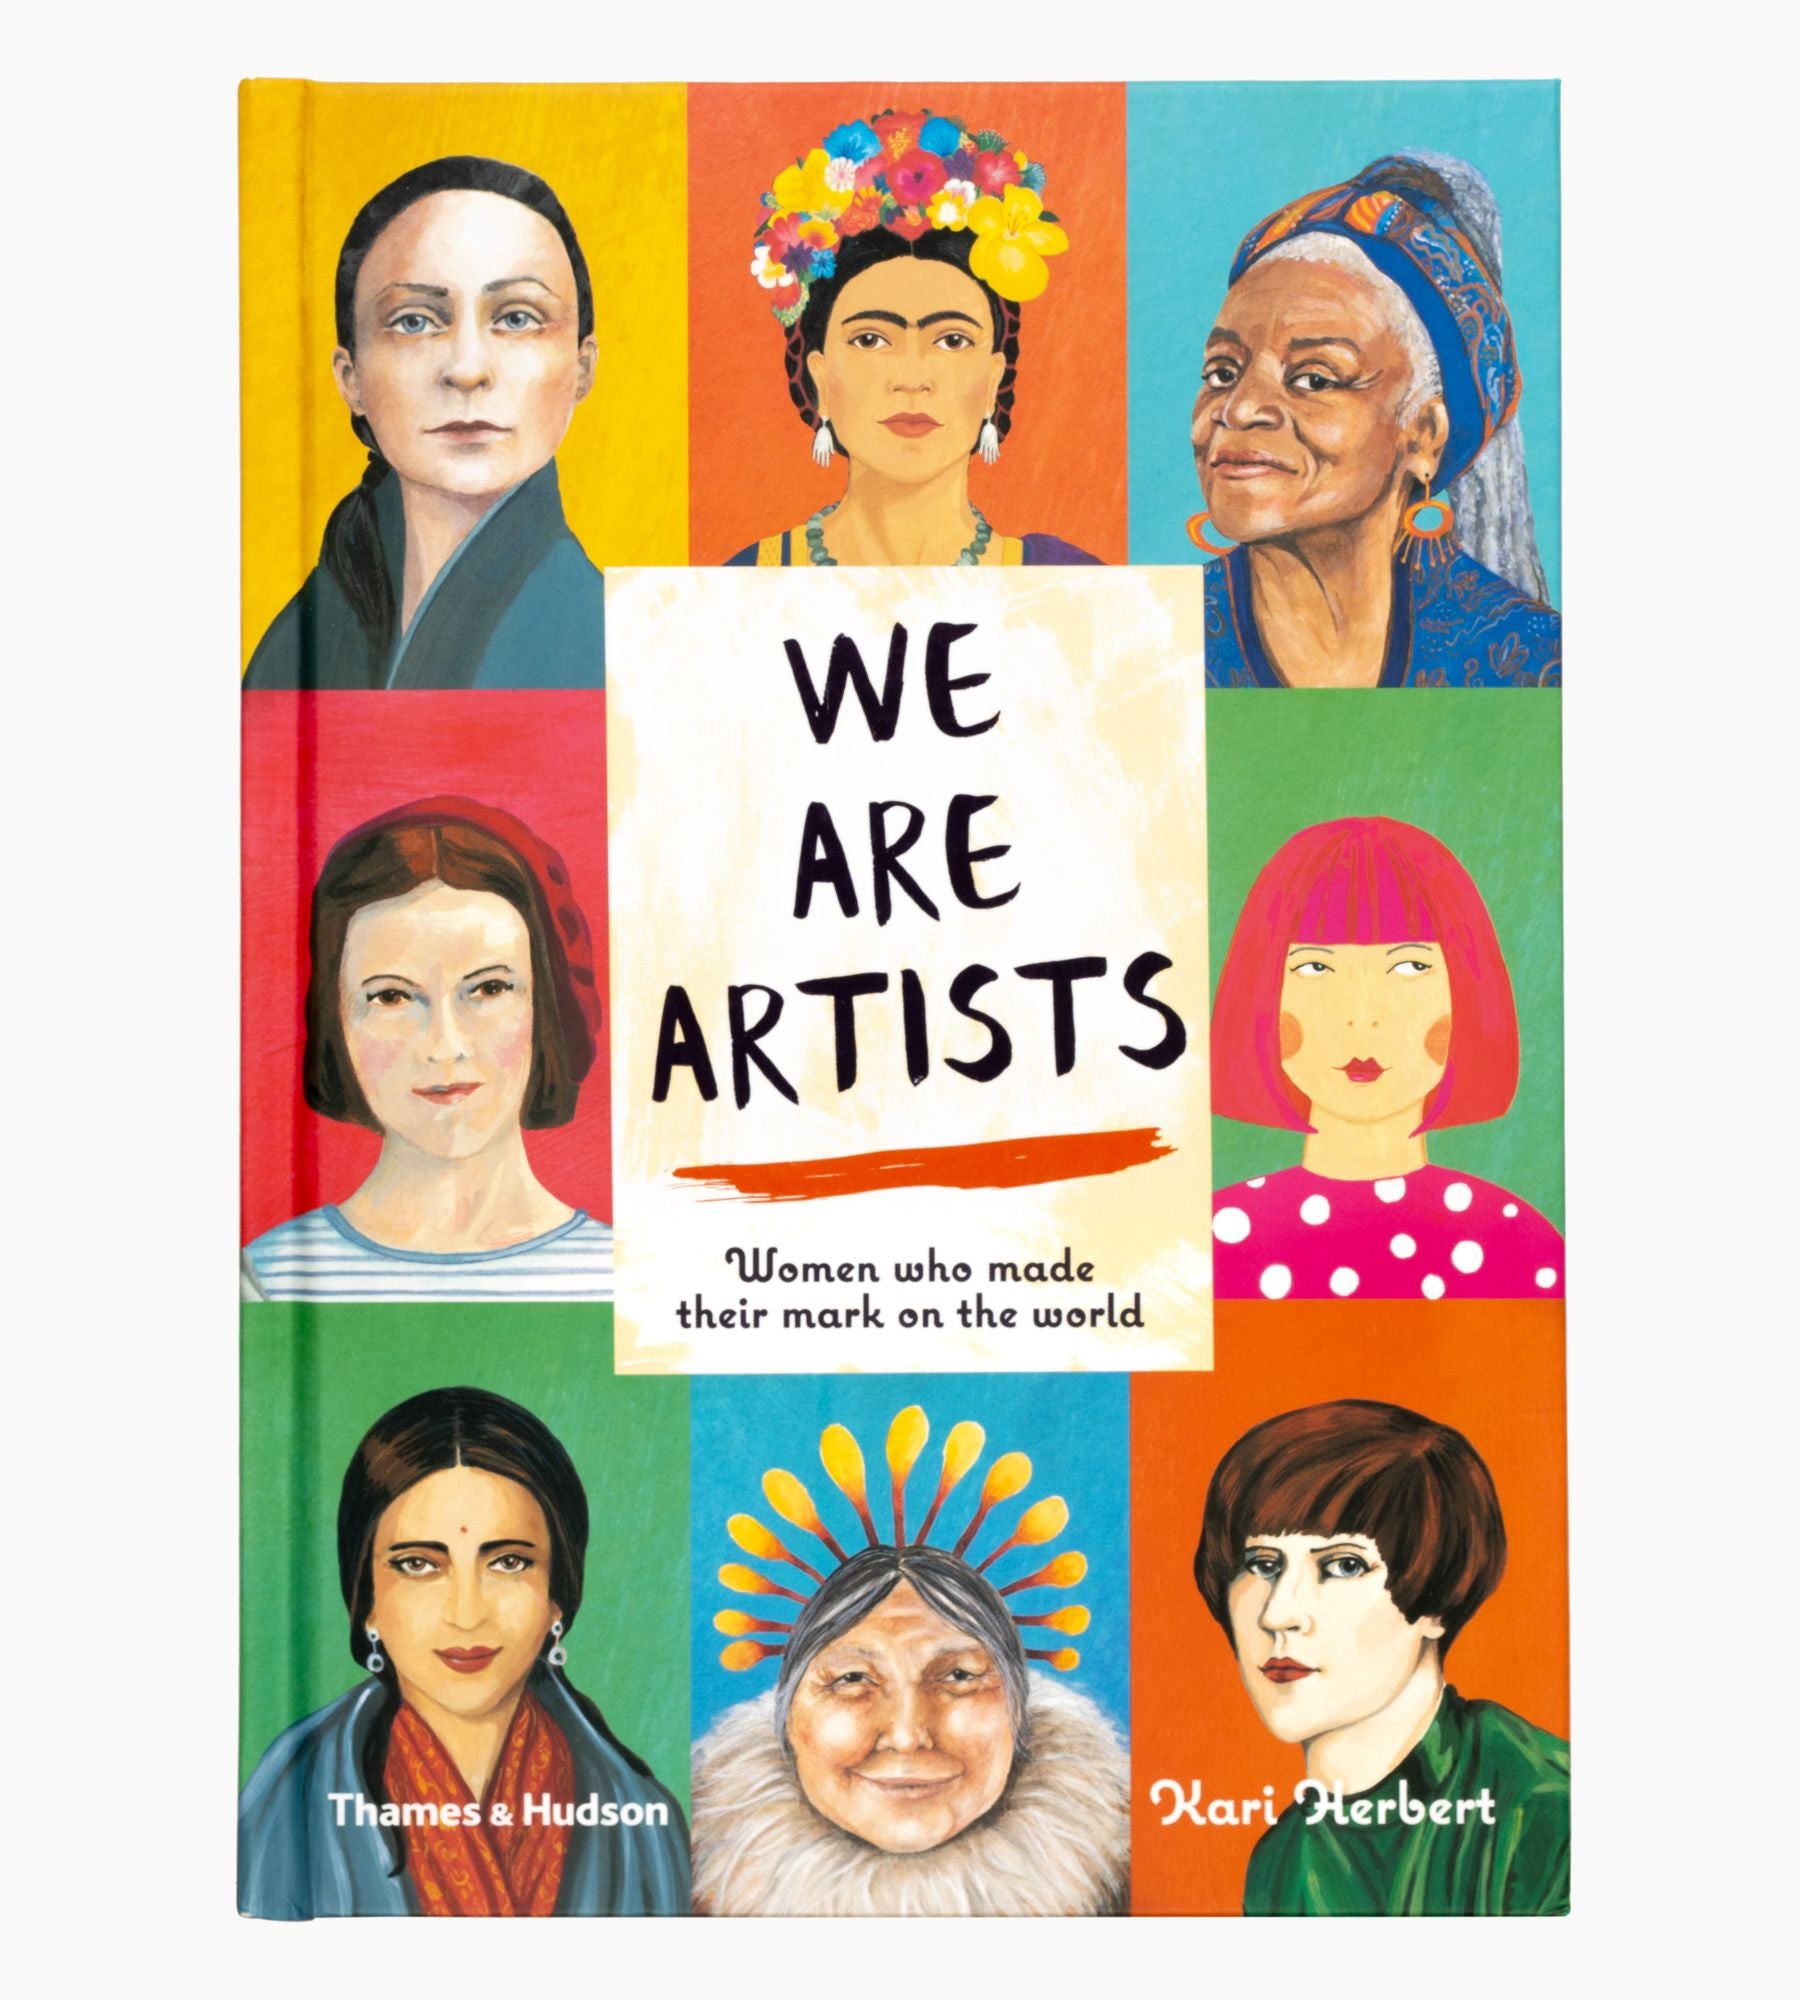 'We Are Artists' book